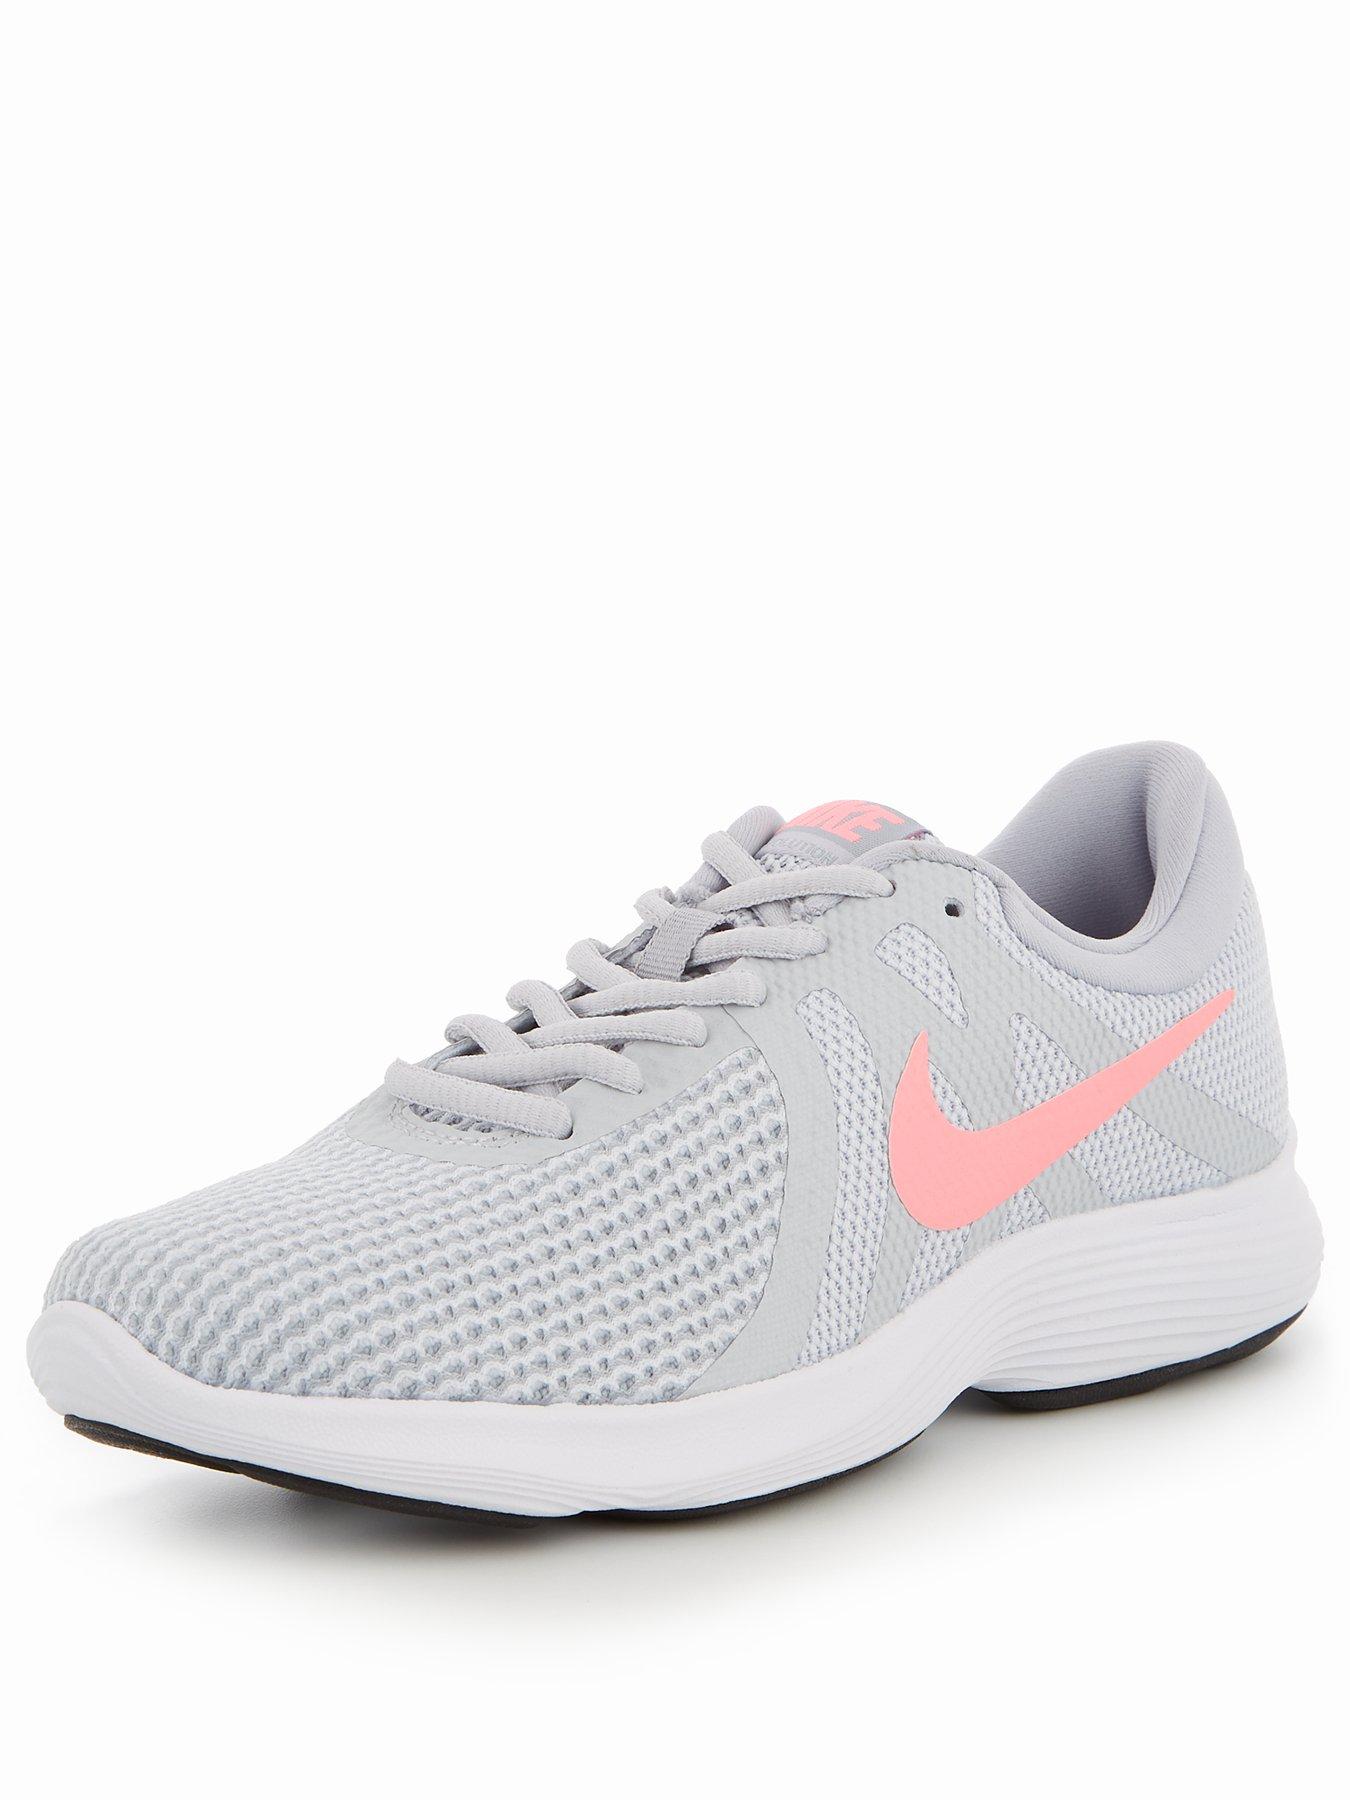 pink and grey nike